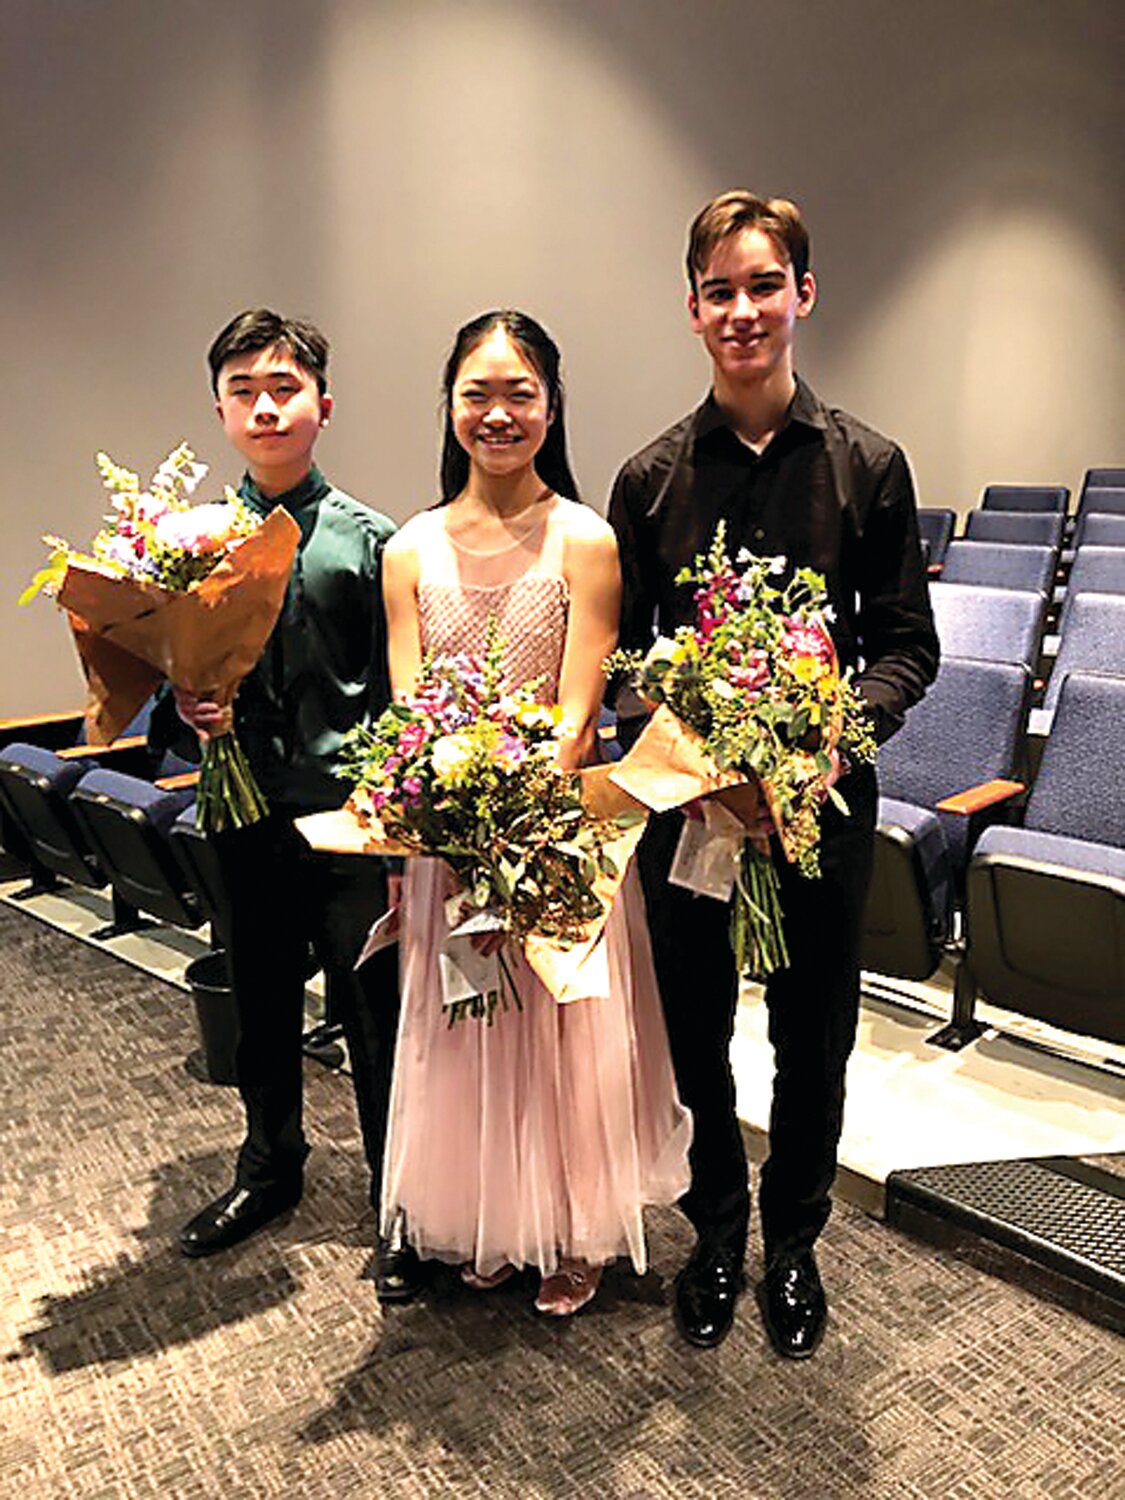 Elizabeth “Poppy” Song, 14, first prize winner of the 2024 Caprio Young Artists Competition, center, with Noah Ferris, 17, second prize winner, right, and Kwanyun Loo, 13, third prize winner, left.